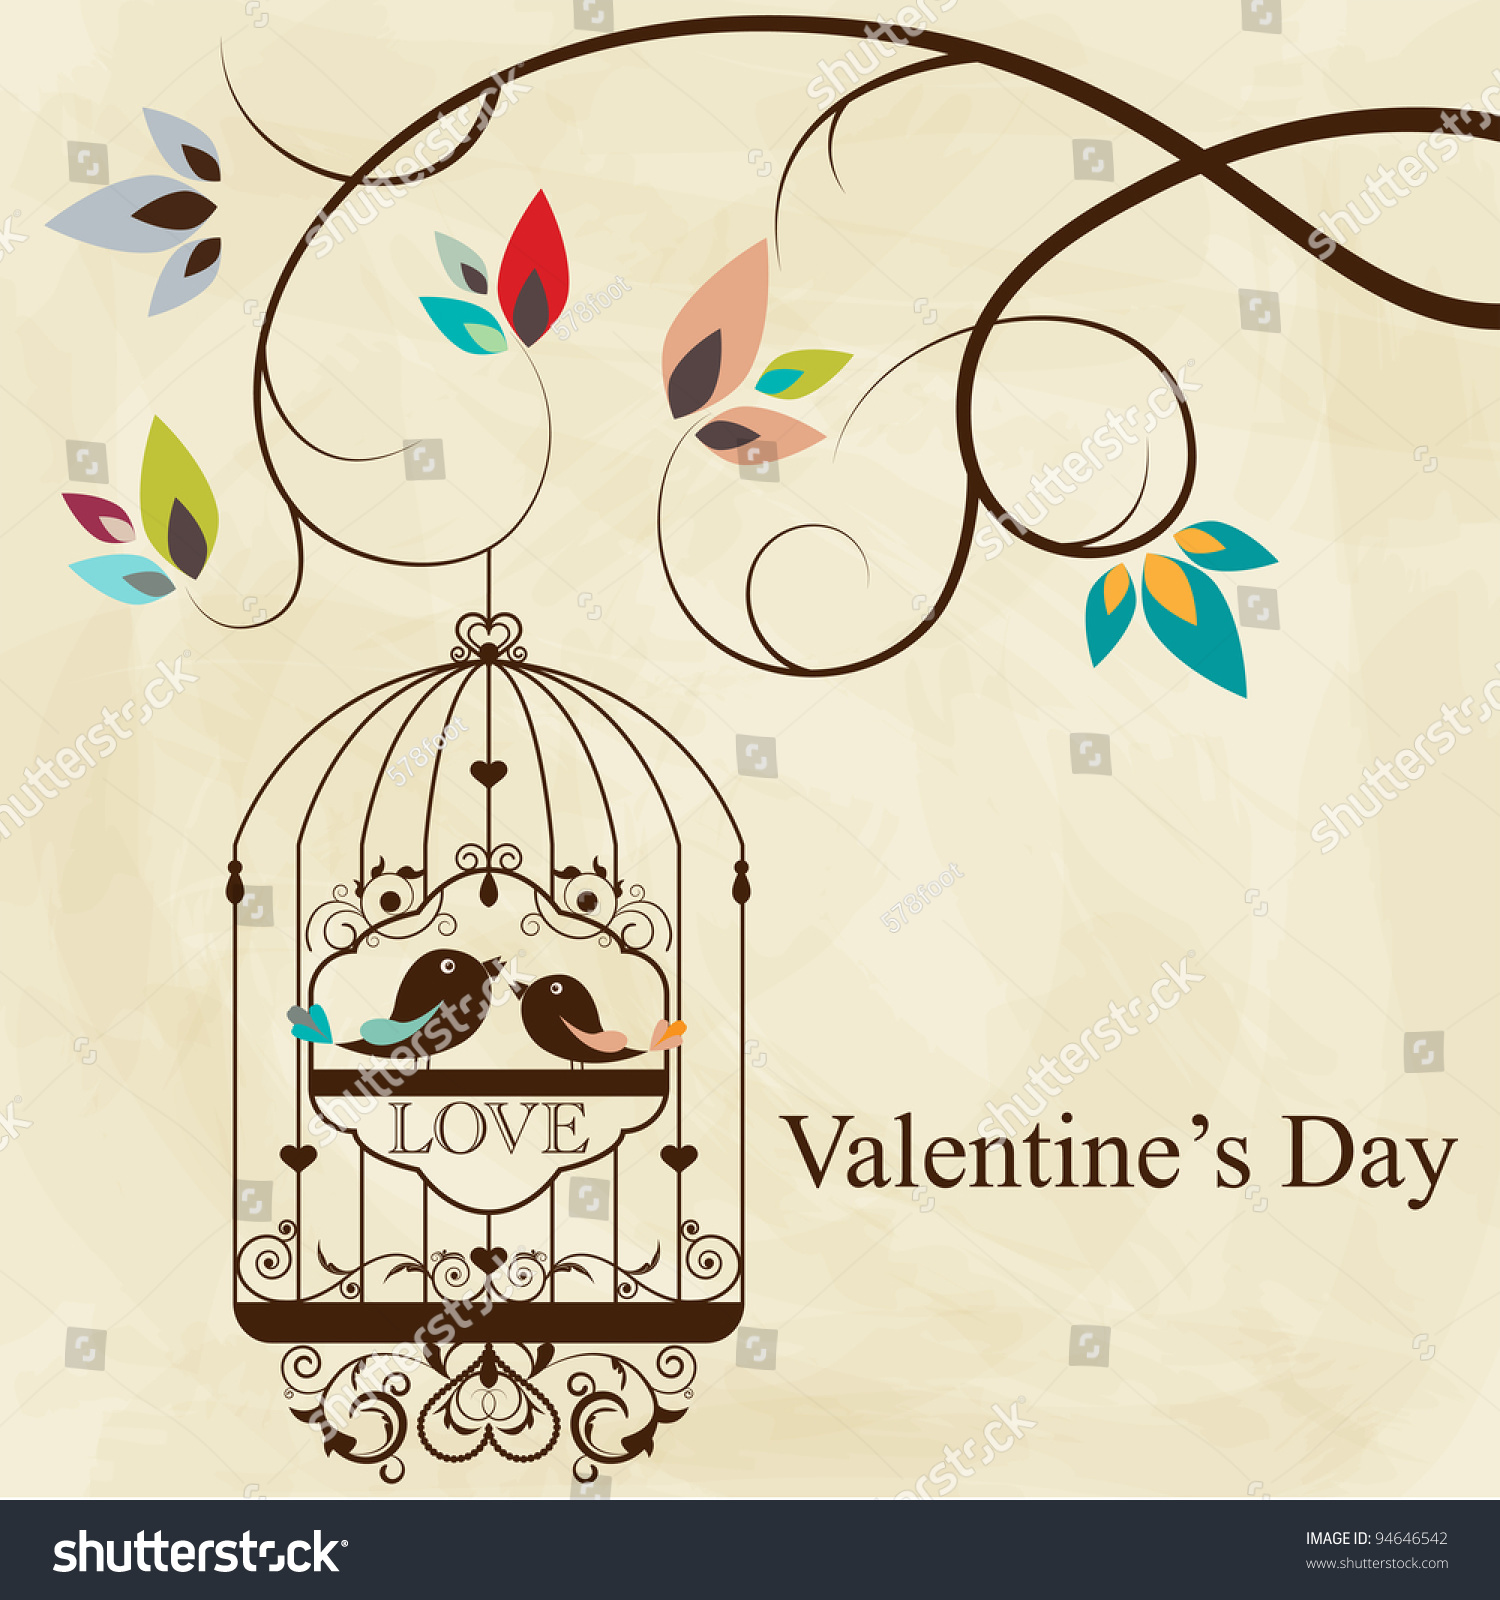 St. Valentine'S Day Greeting Card With Birds Stock Vector 94646542 : Shutterstock